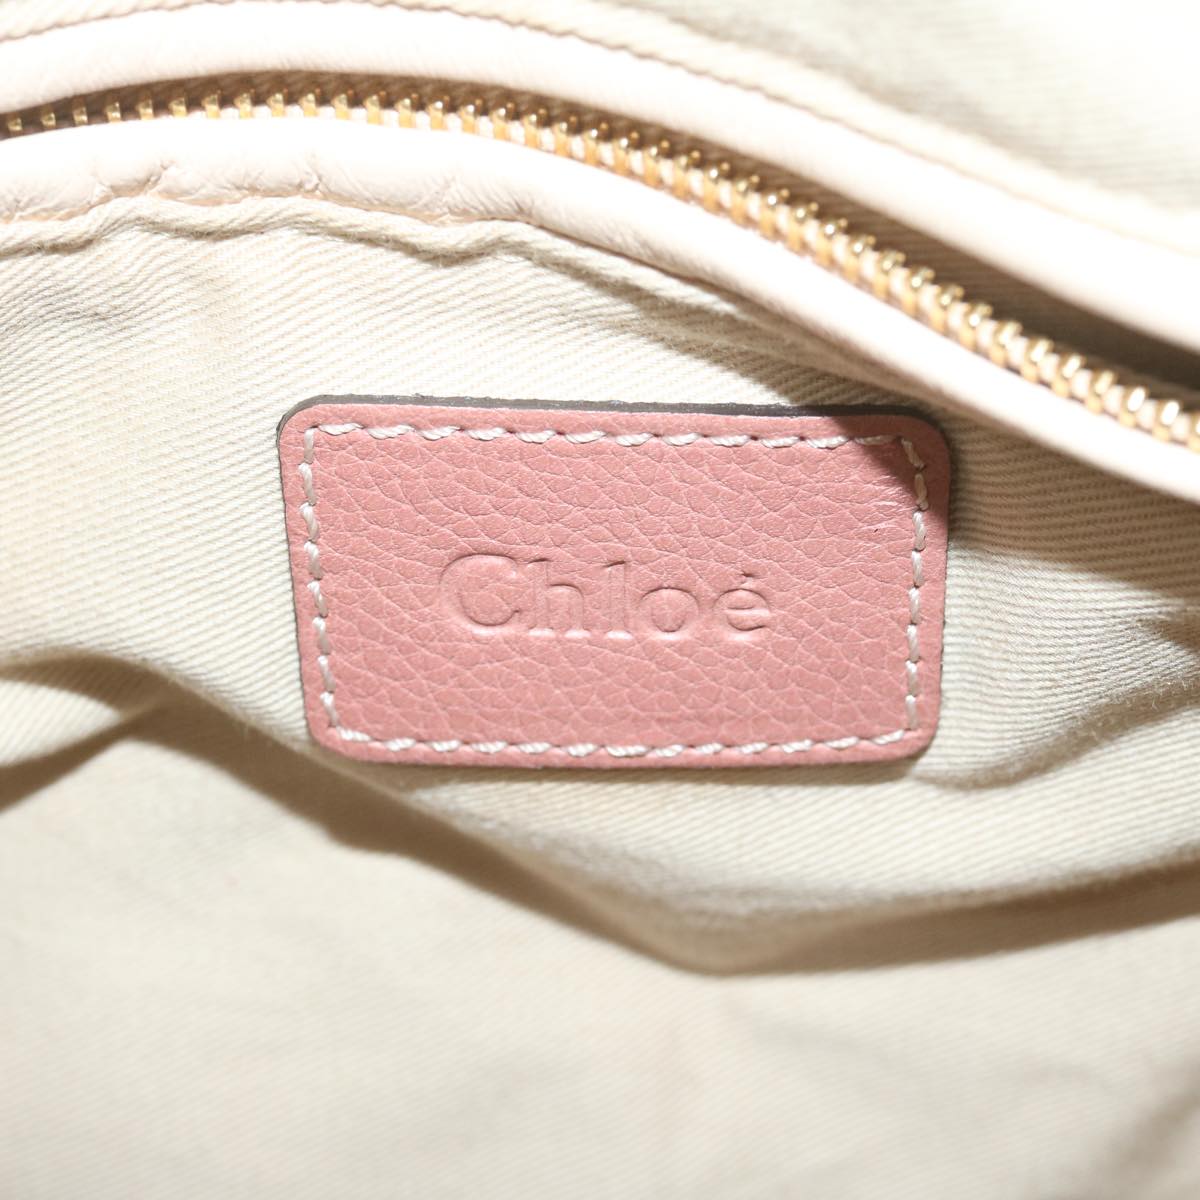 Chloe Paraty Shoulder Bag Leather 2way Pink Auth am5444